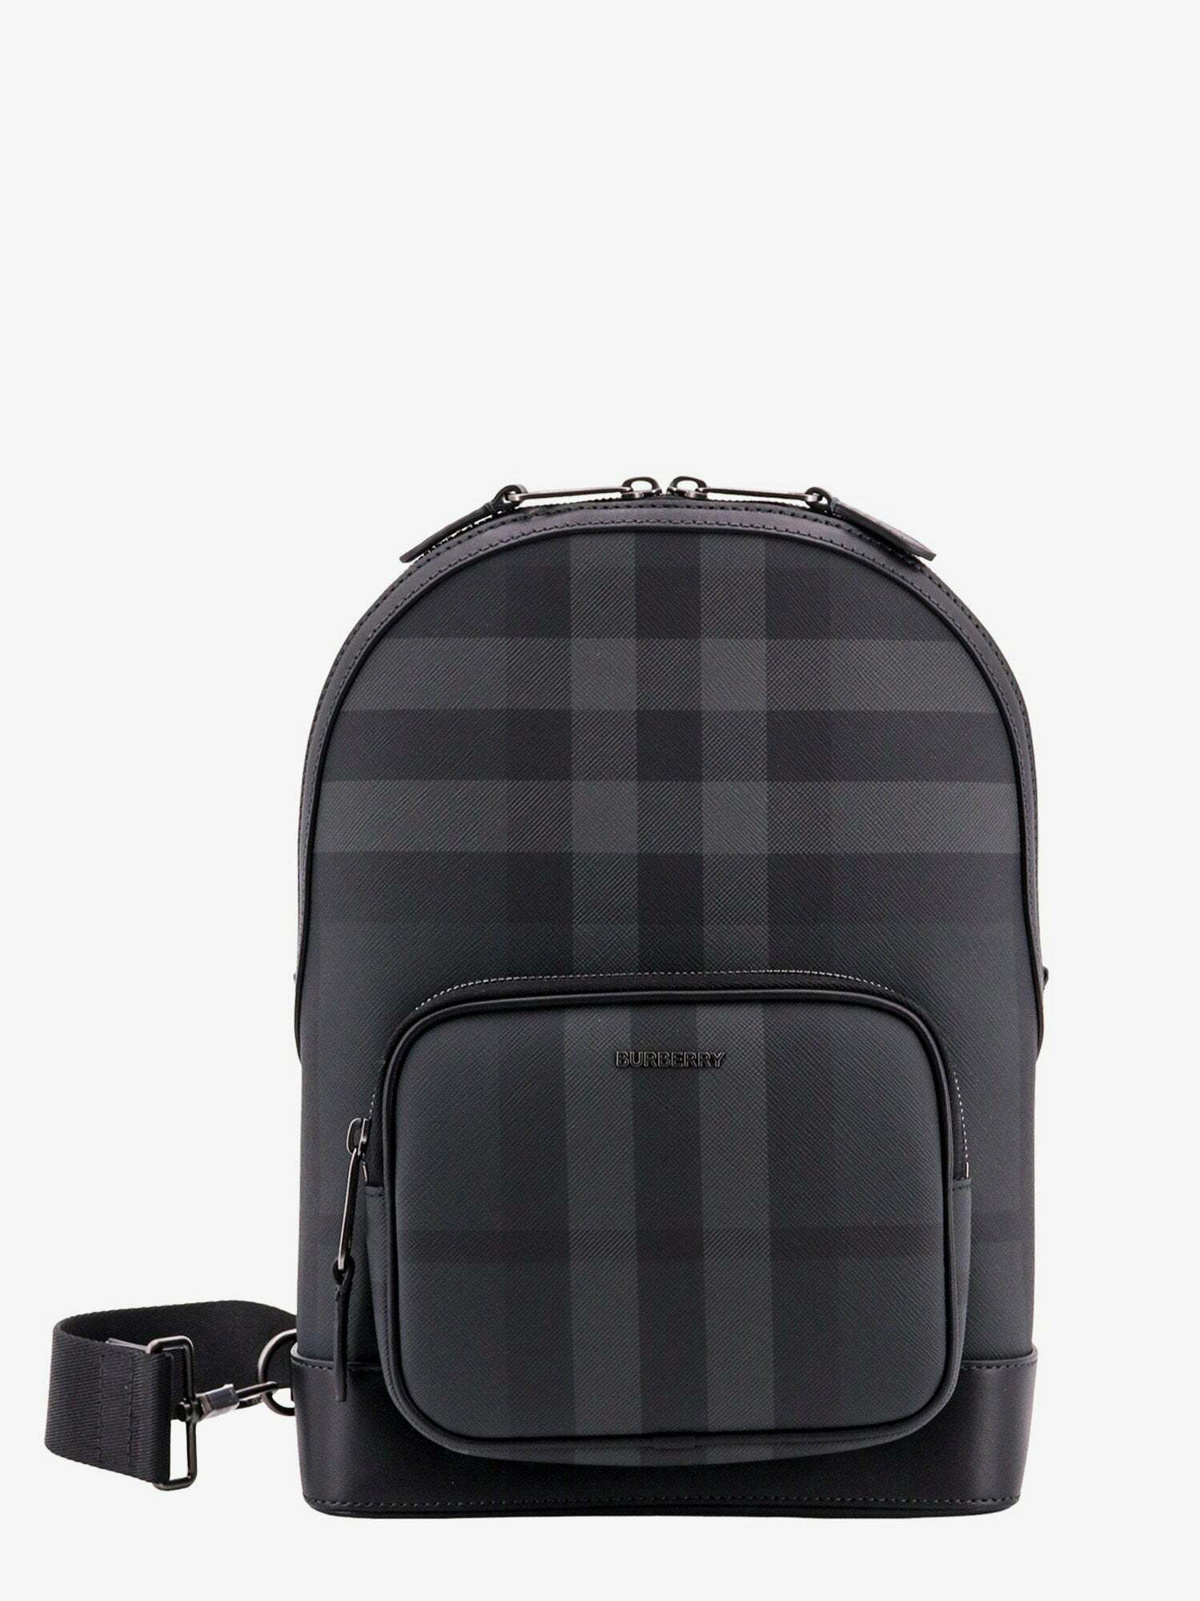 House Check Wash Bag in Black - Burberry